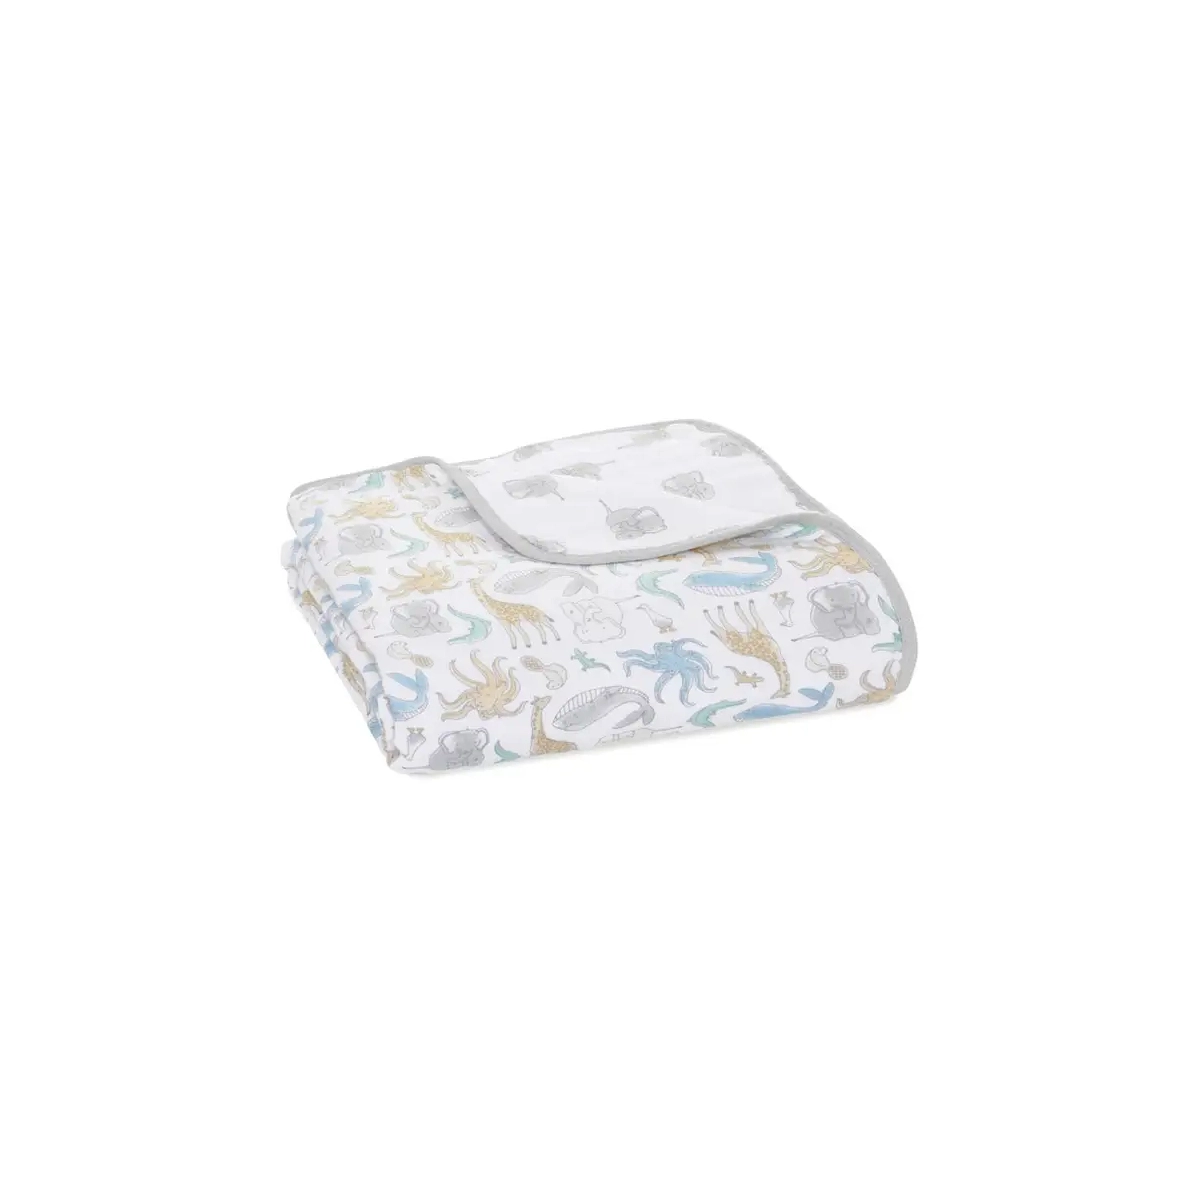 Image of Aden + Anais Essentials Cotton Muslin Blanket - Natural History (23-19-294)